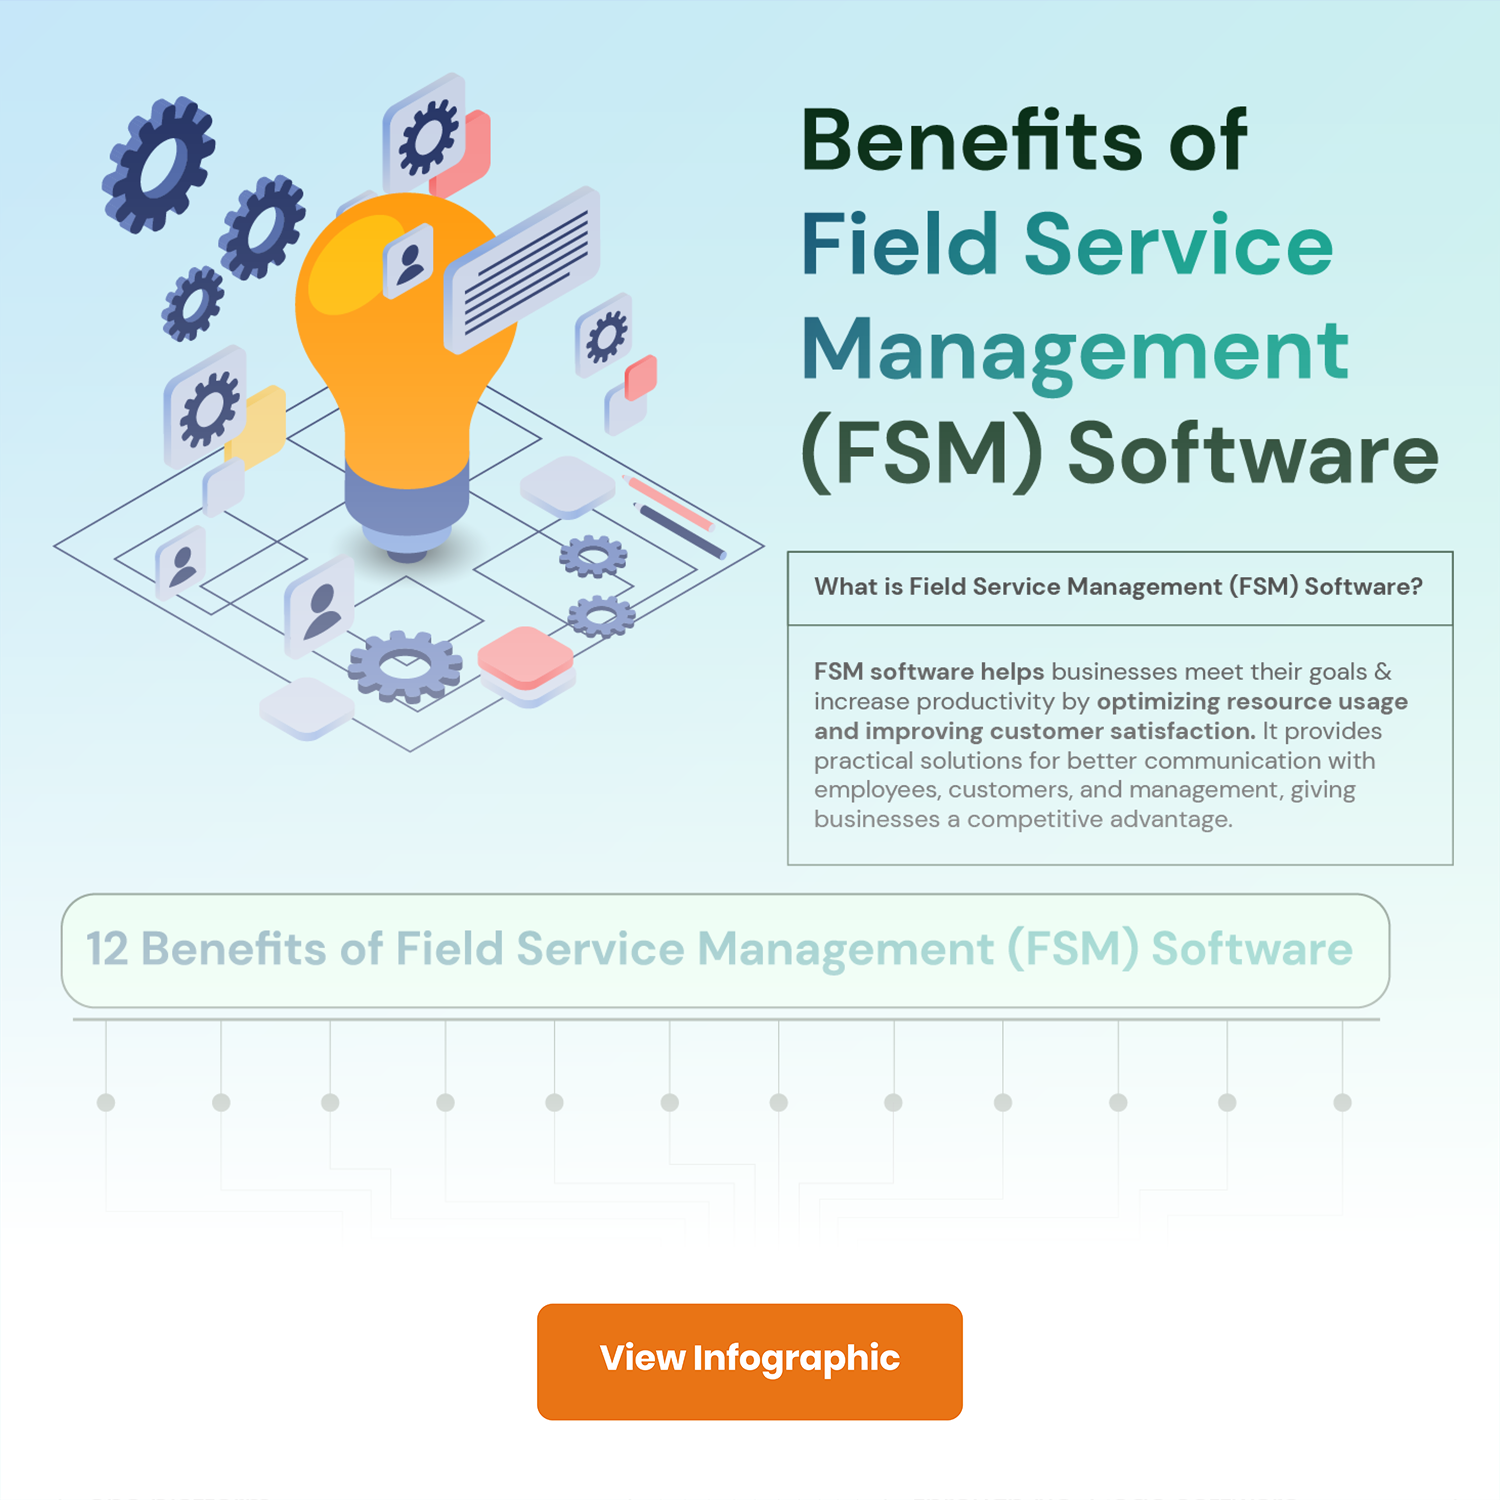 benefits of field service management software infographic